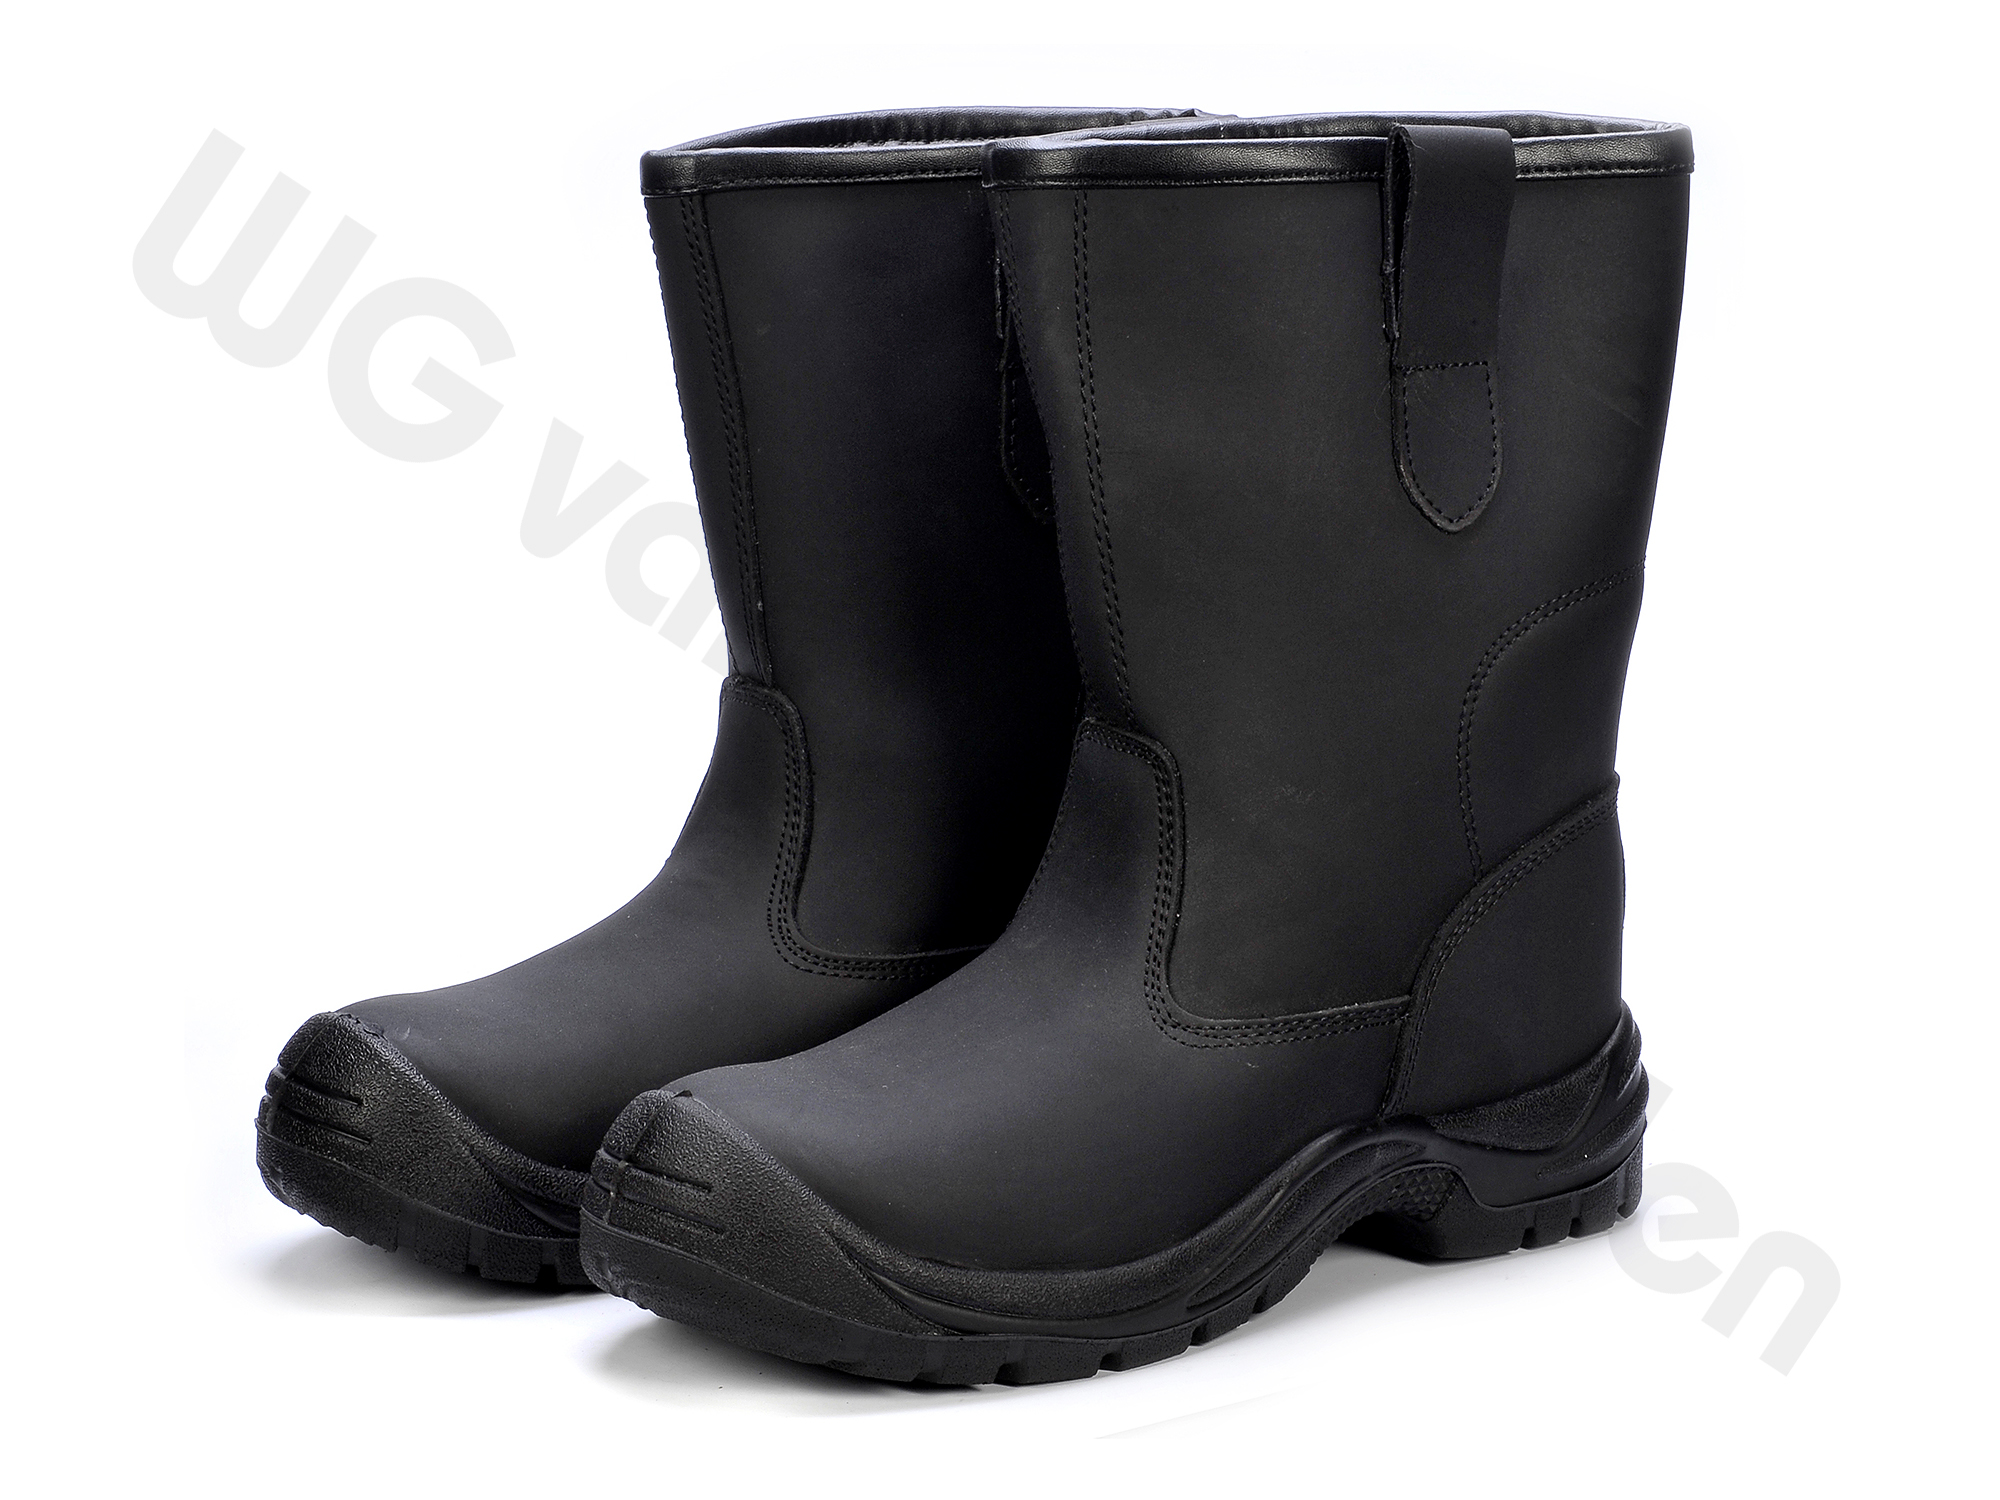 880354 BOOTS SAFETY S3 LEATHER W/STEEL TOE AND LINING 43/27.5CM